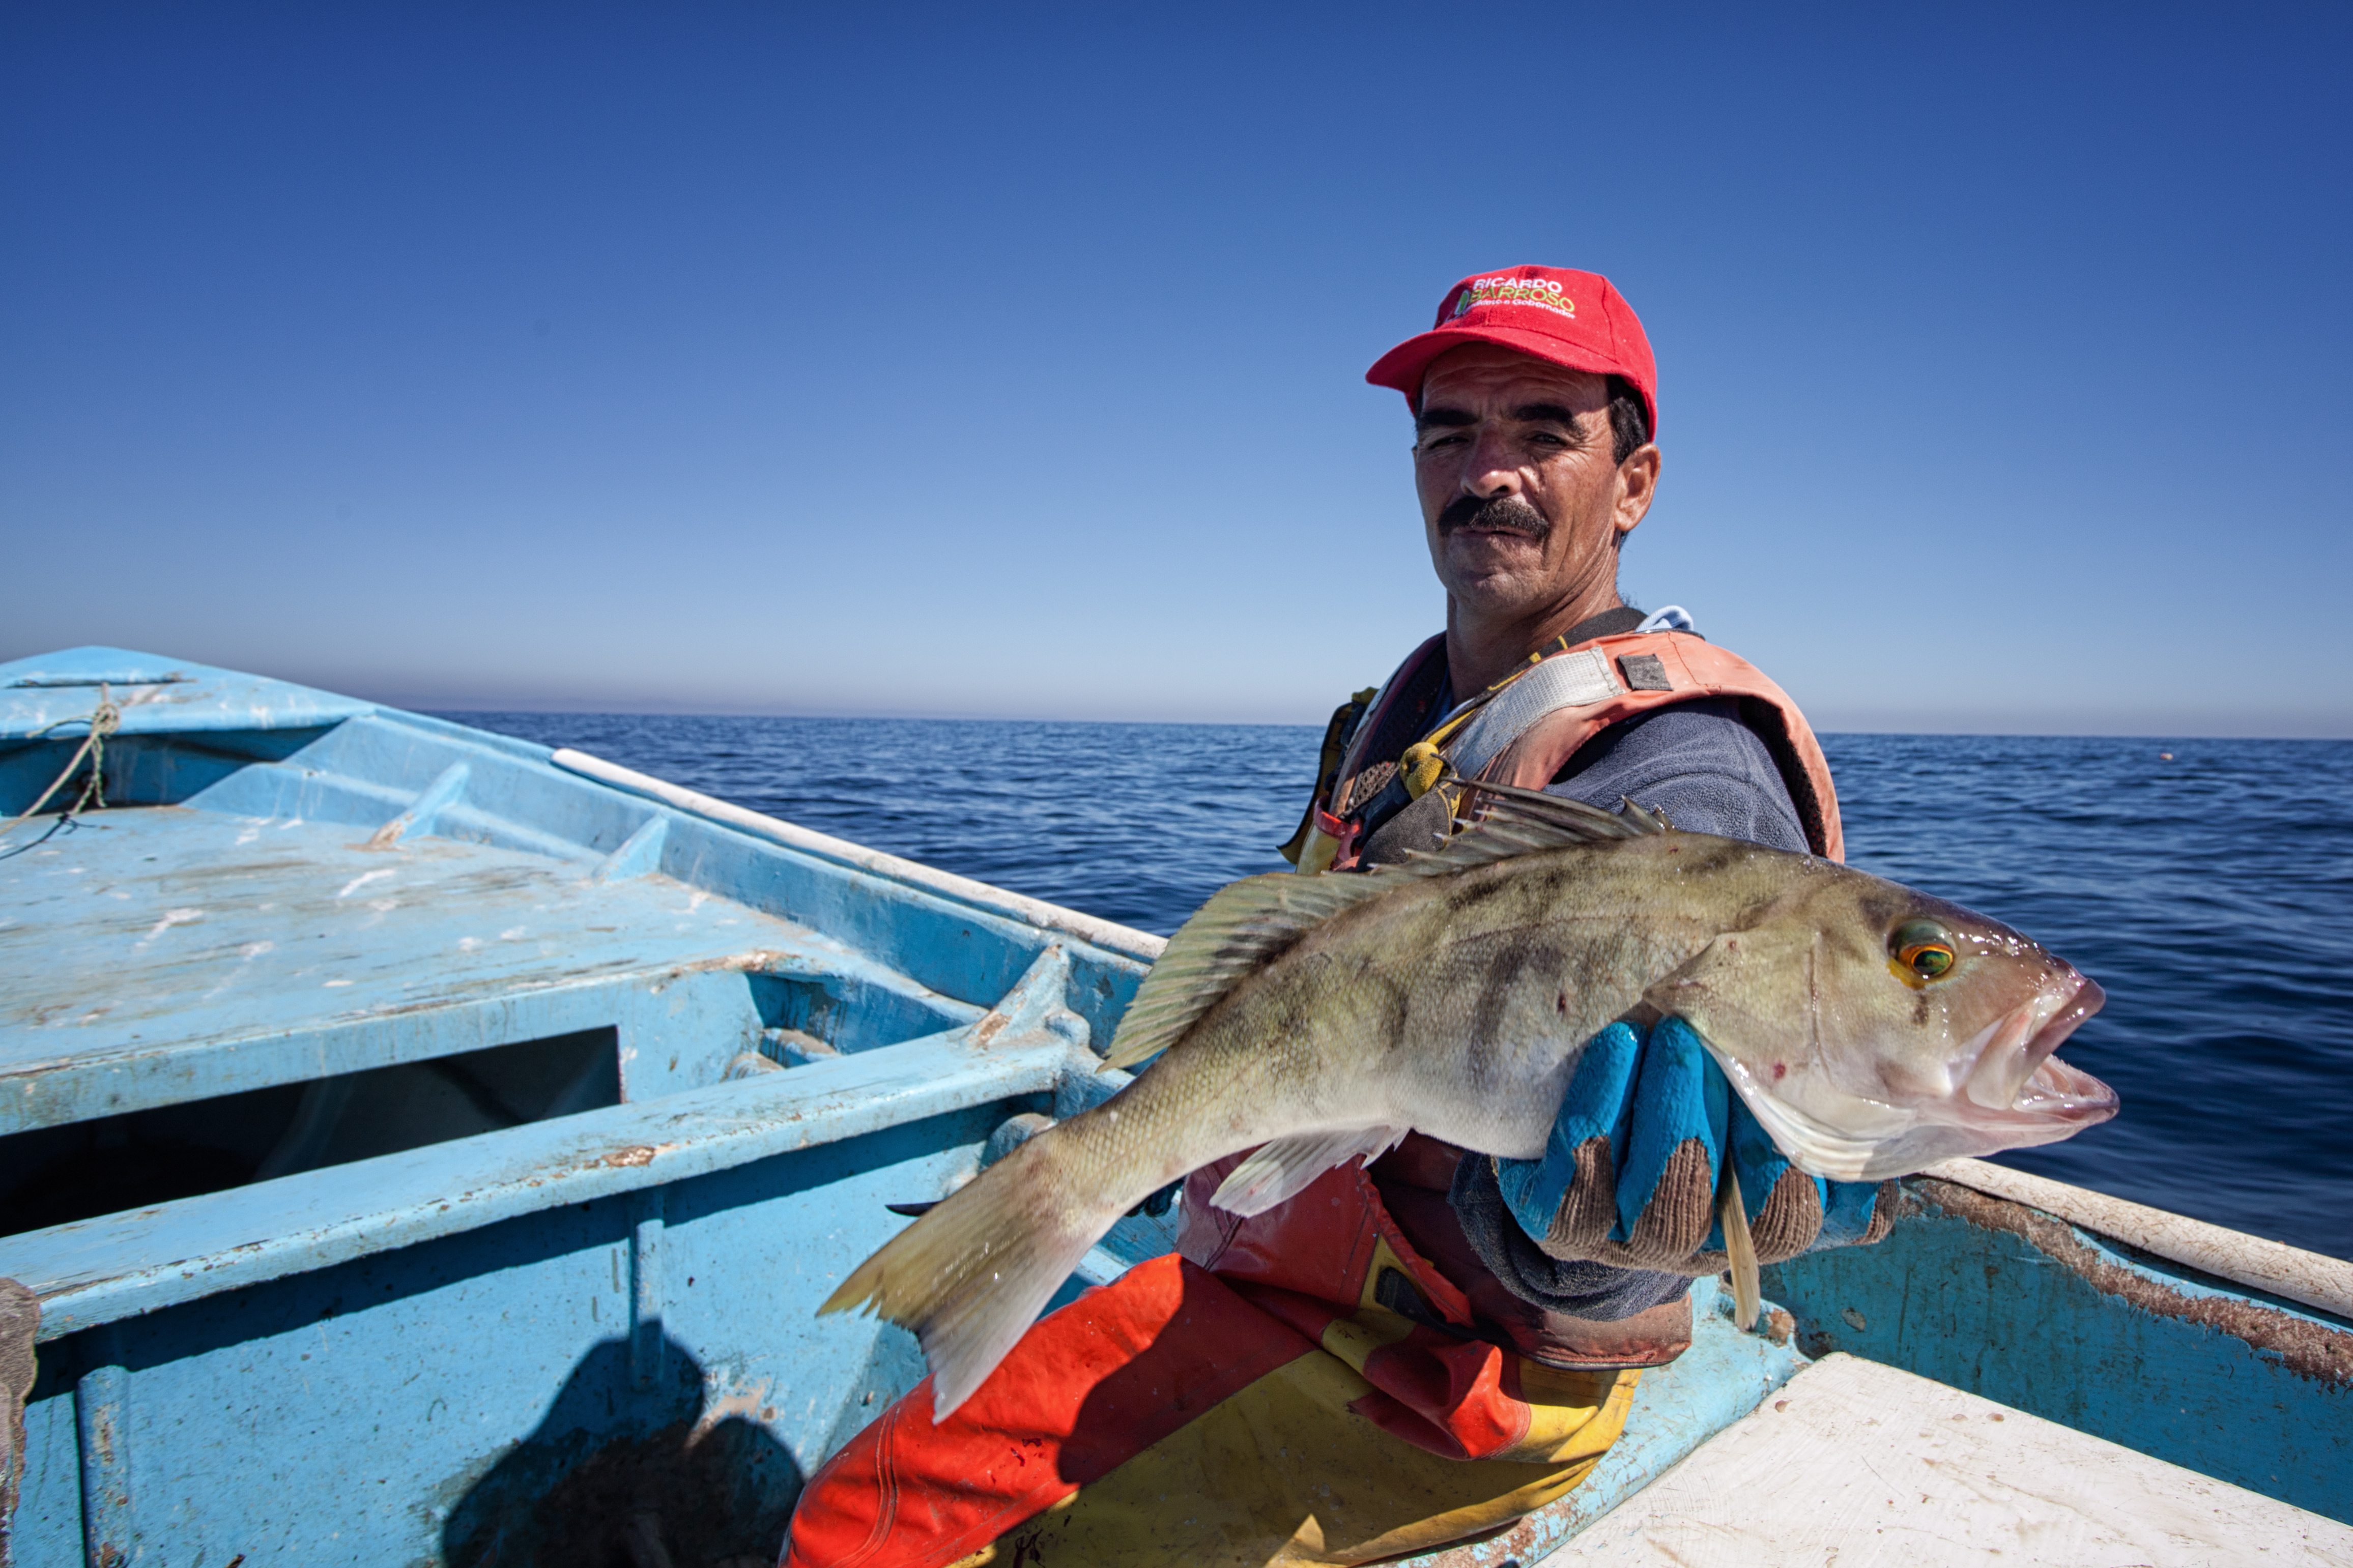 Small-scale fishers in Mexico out in the sea press release photo